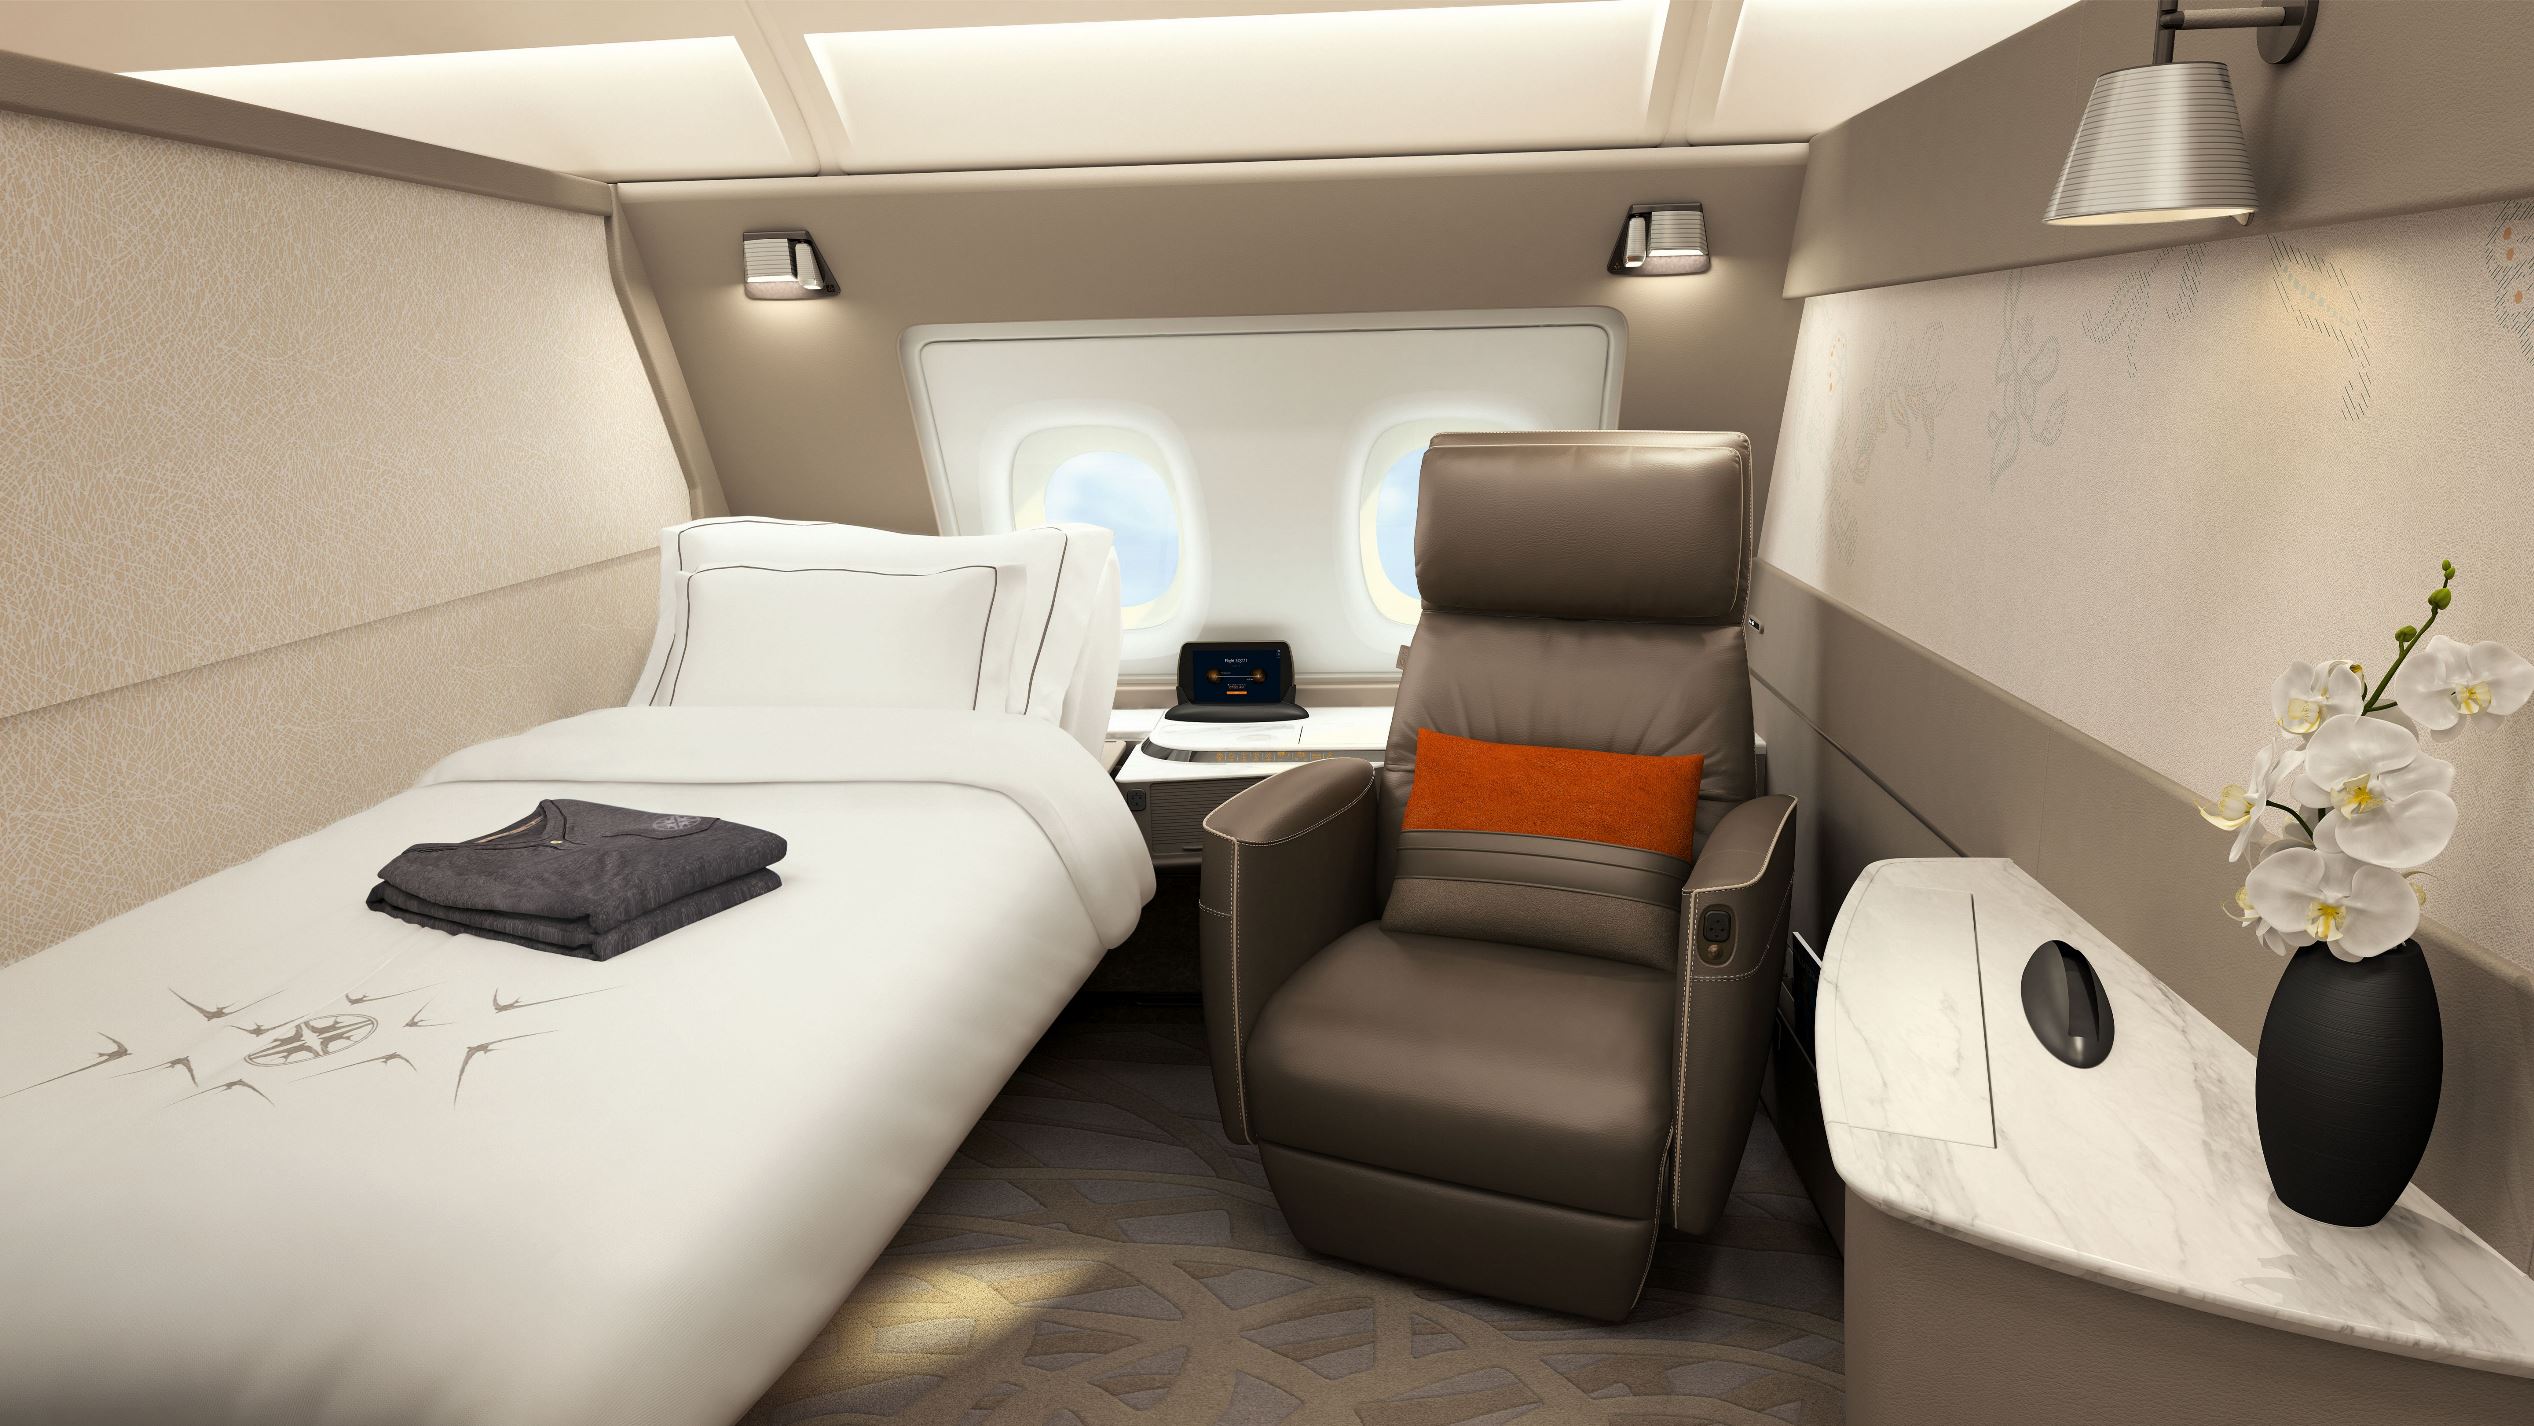 Singapore Airlines A380: The Best and Biggest First Class Suite